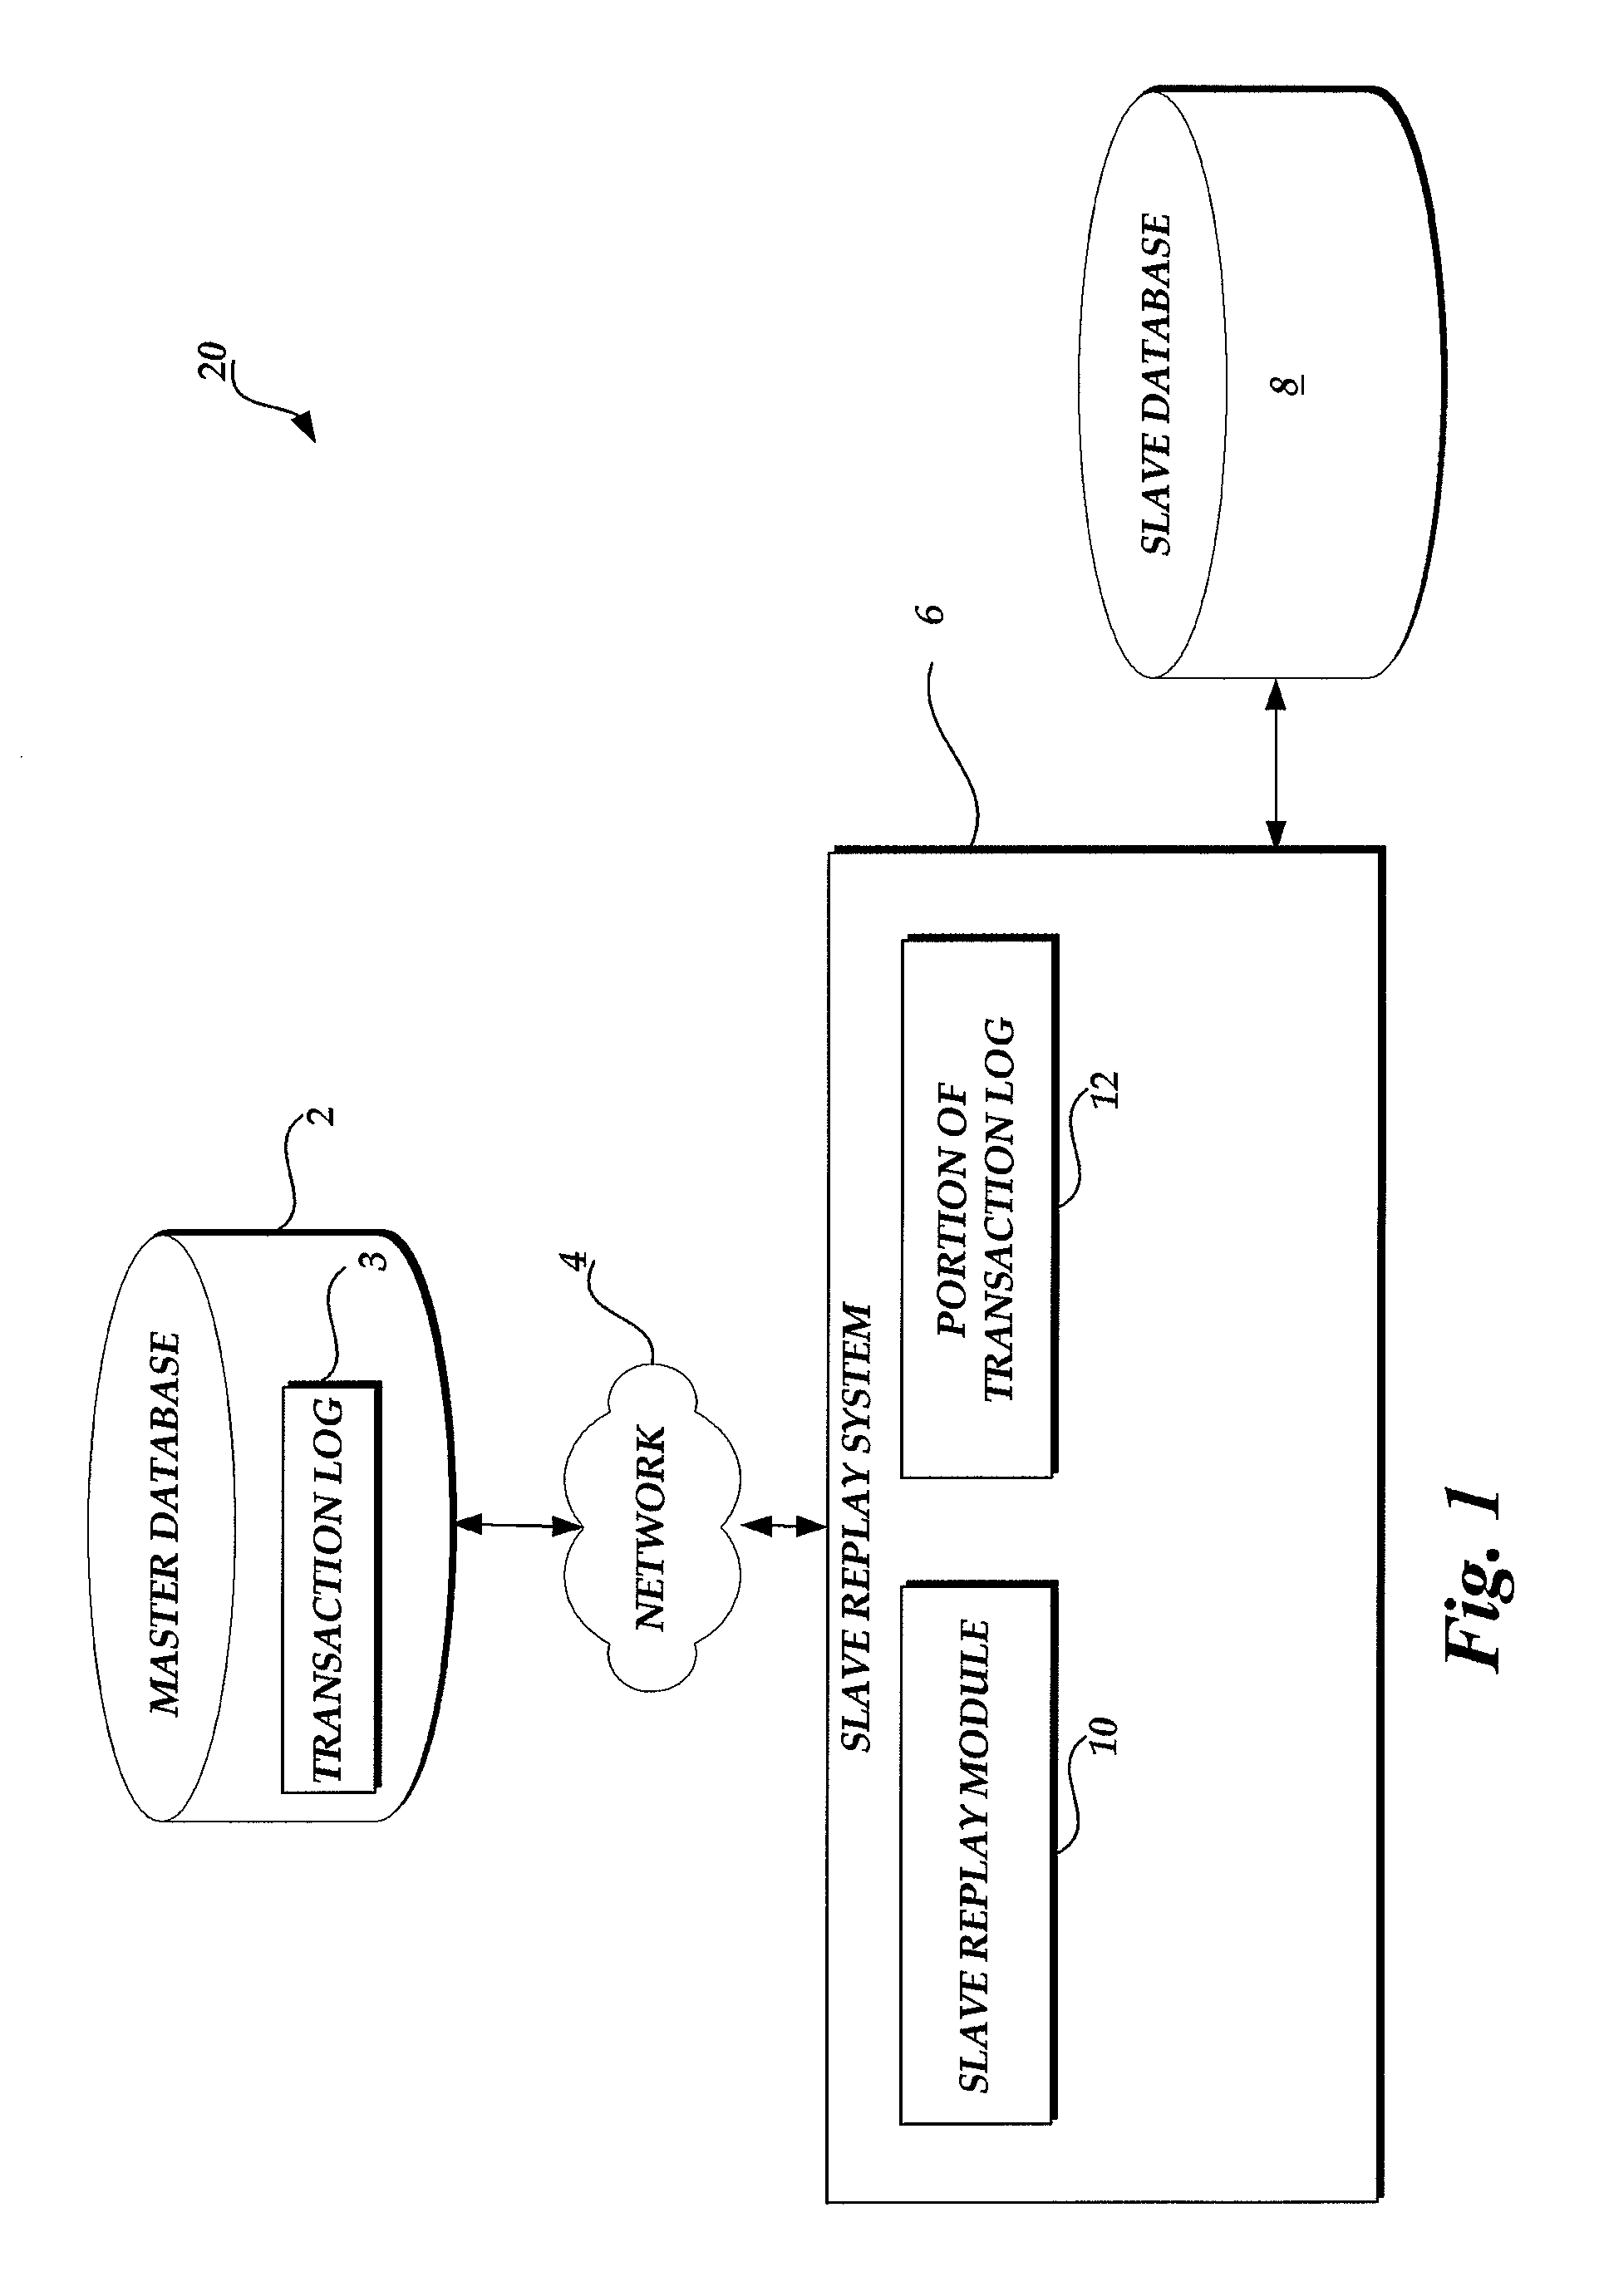 Systems and methods for replication replay in a relational database